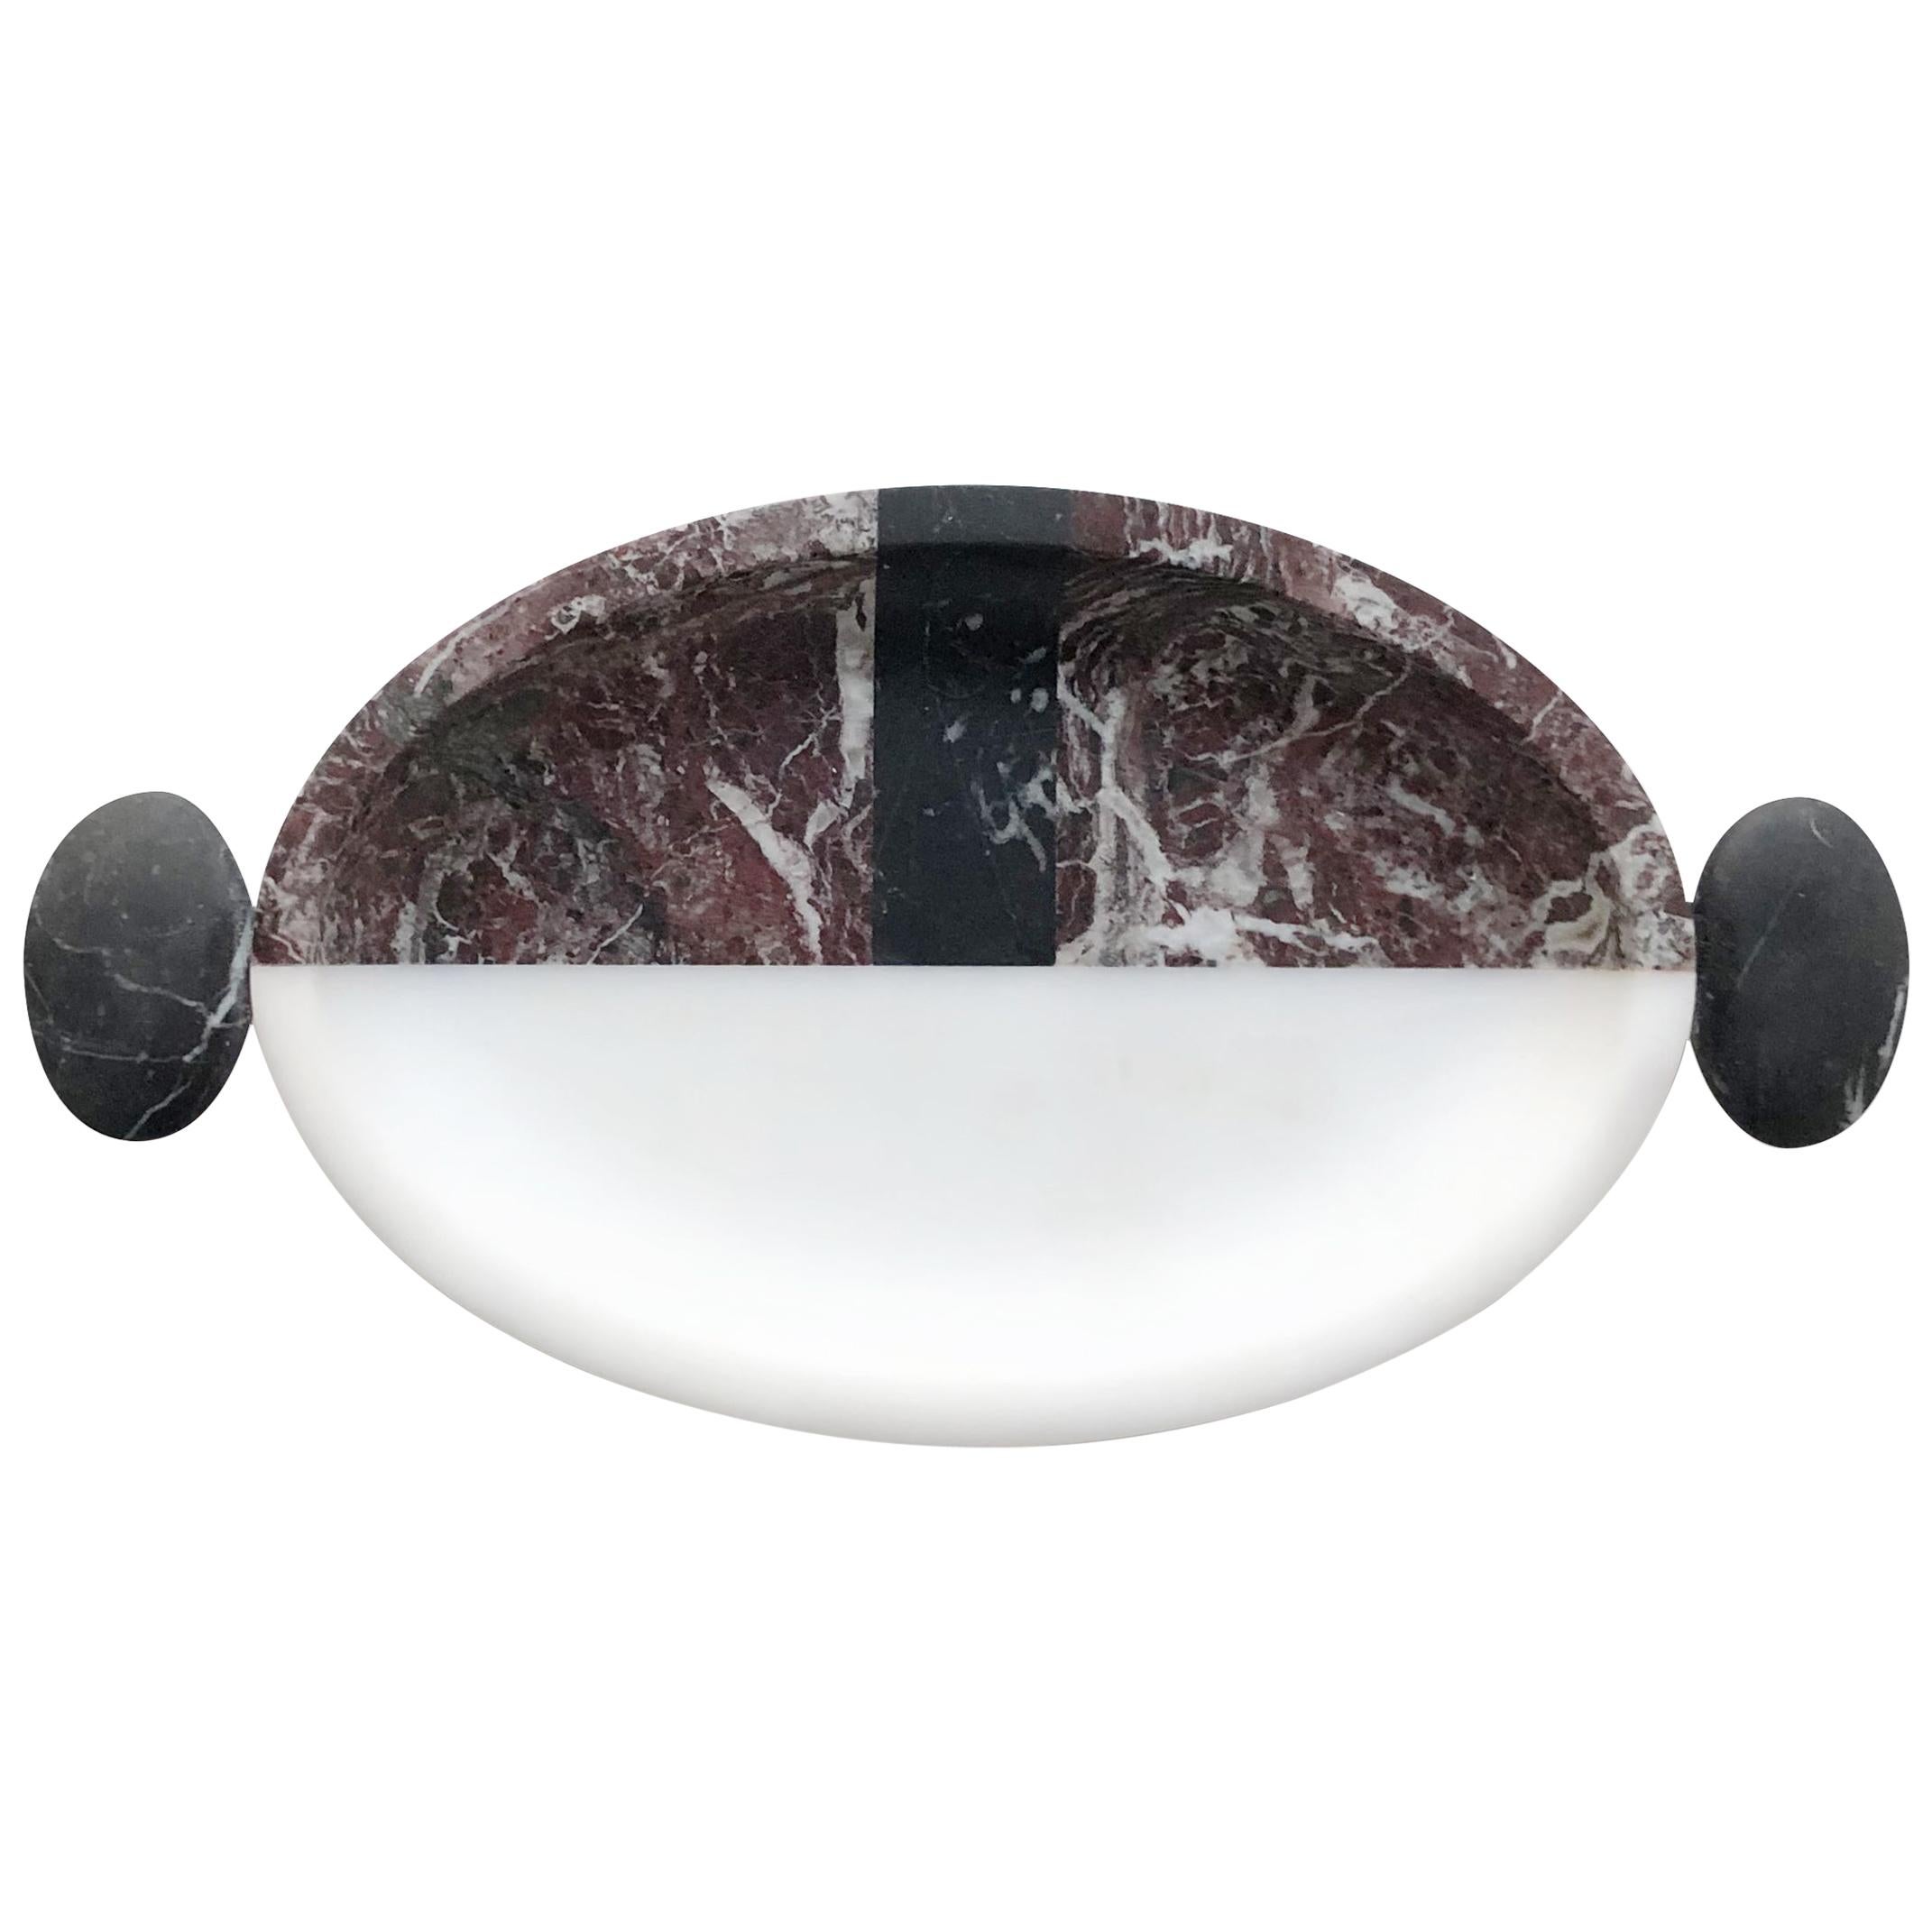 New Modern Serving Tray in Marble Creator Matteo Cibic, stock 